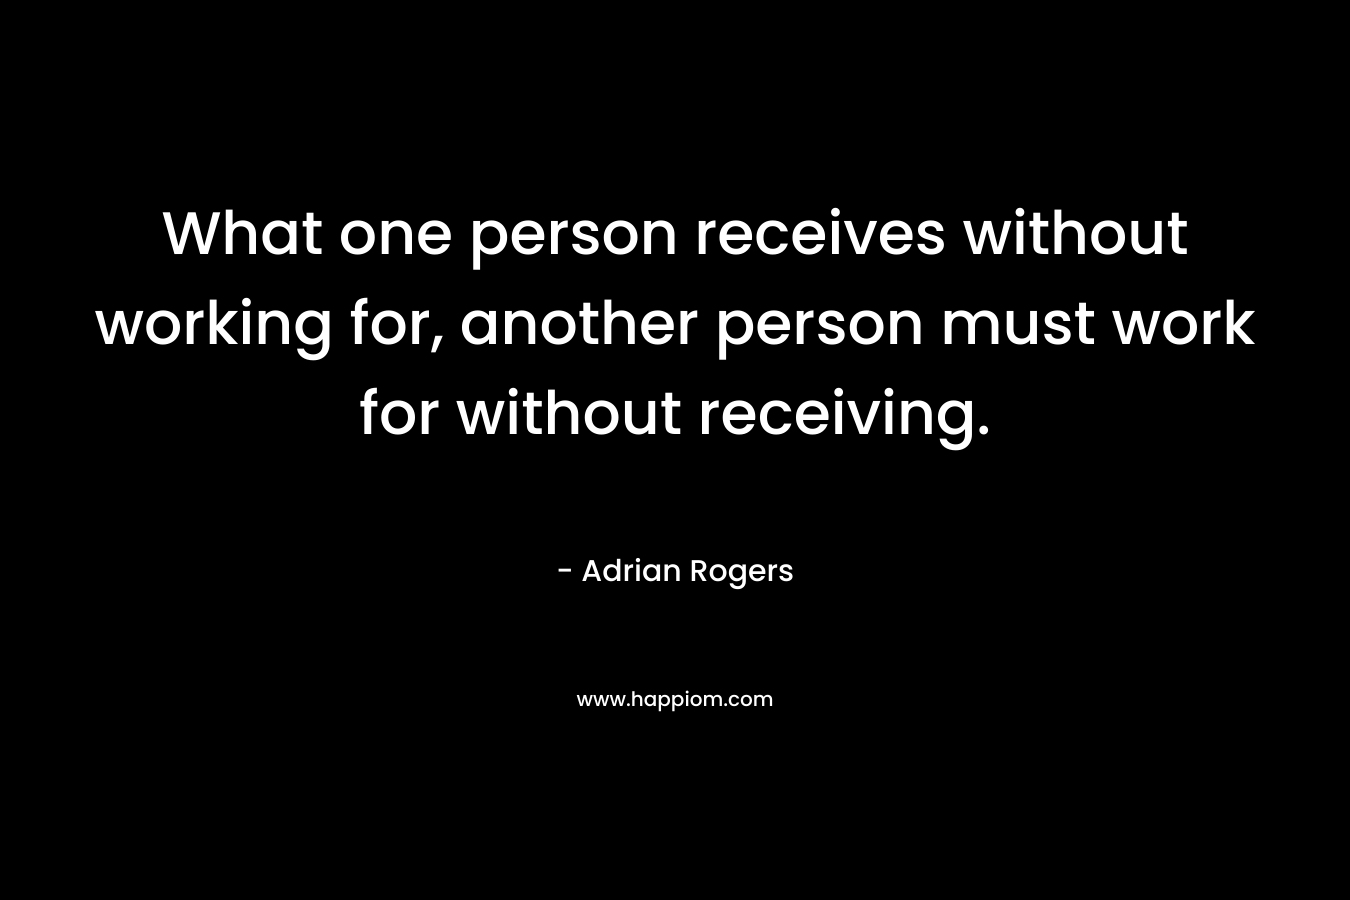 What one person receives without working for, another person must work for without receiving.